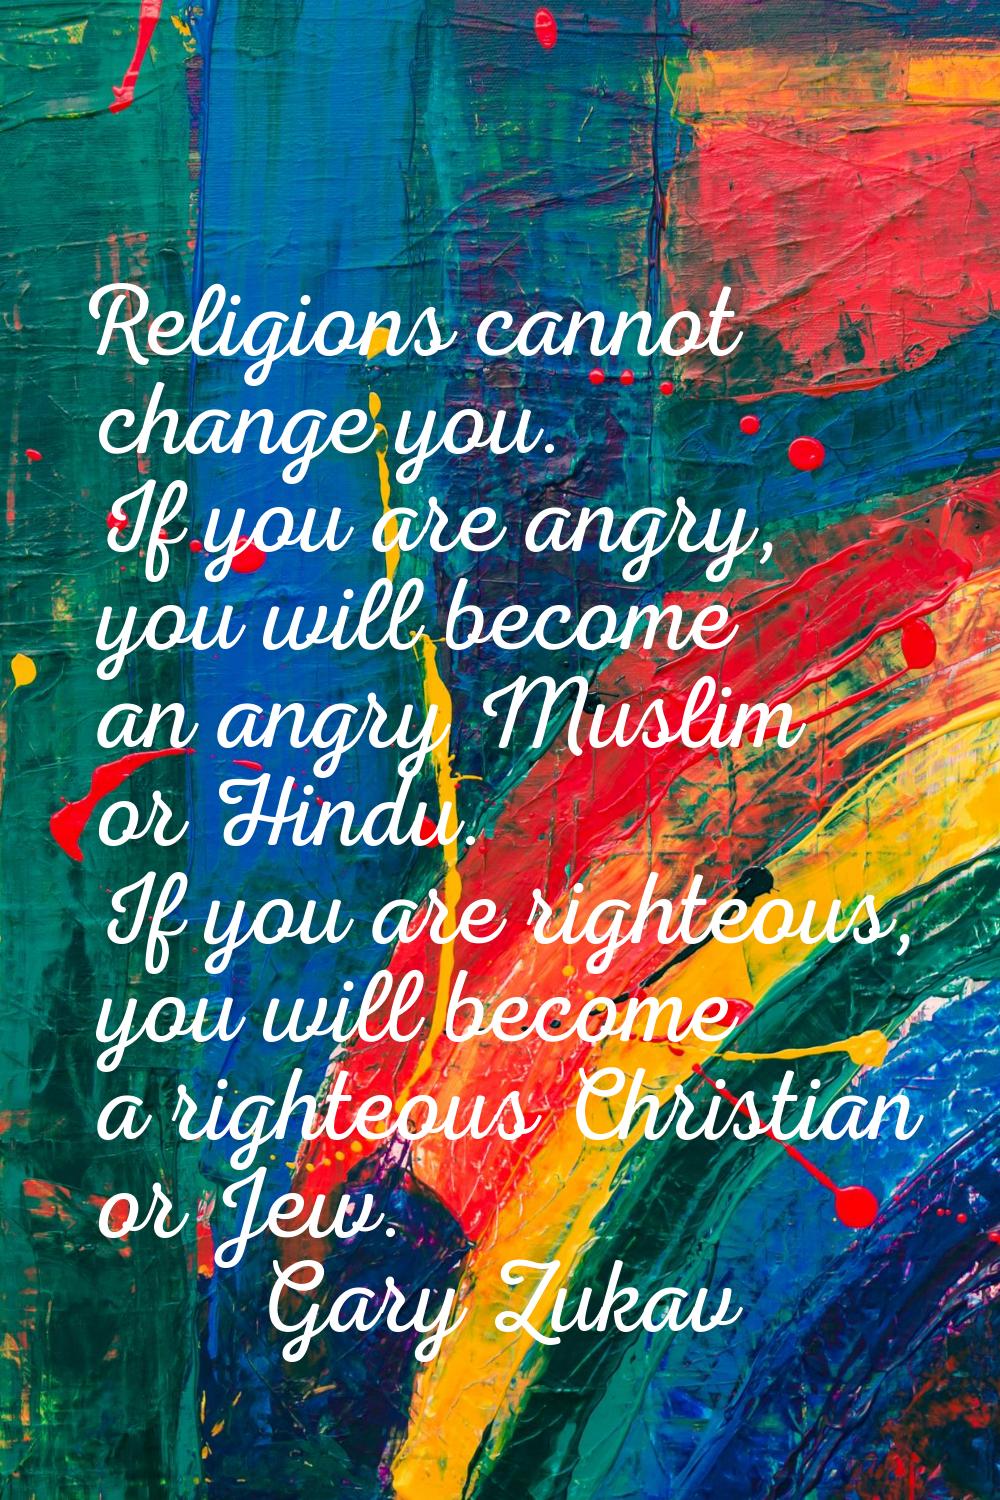 Religions cannot change you. If you are angry, you will become an angry Muslim or Hindu. If you are